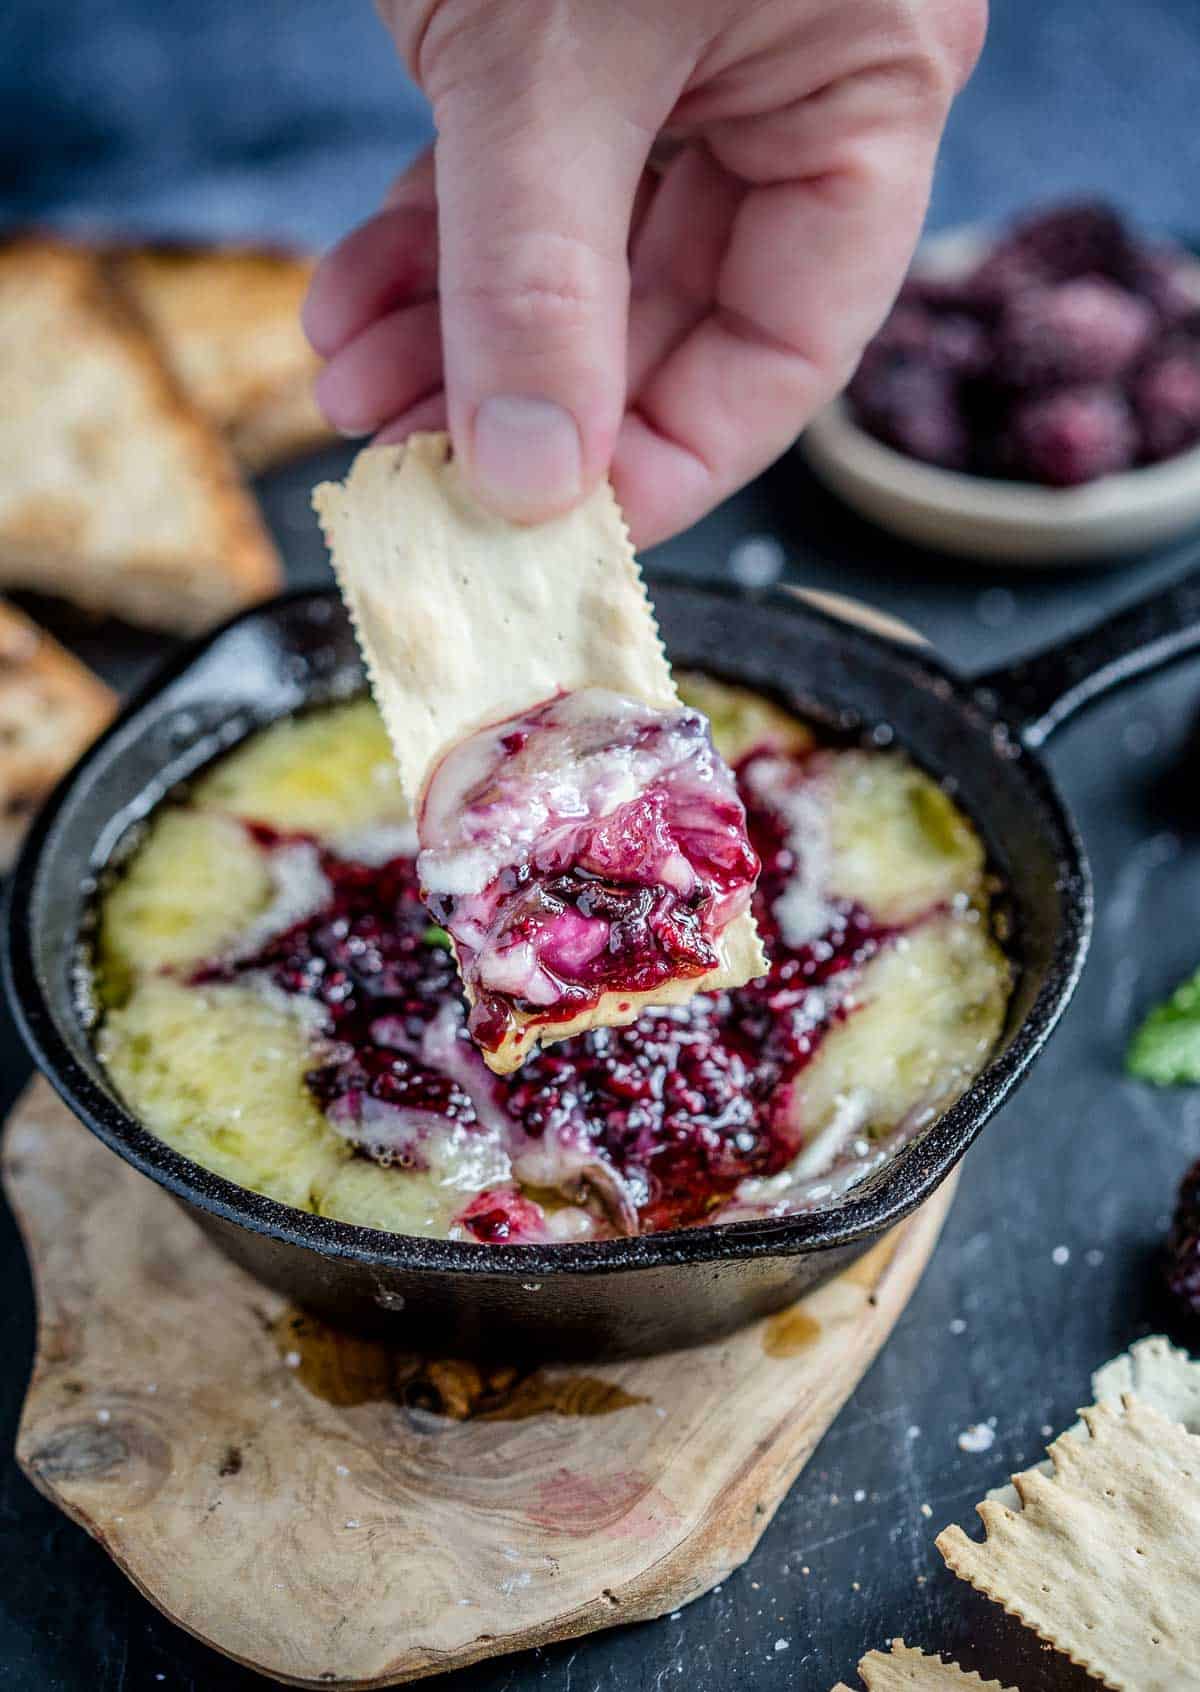 Grilled Baked Brie with Blackberry Jam on a cracker